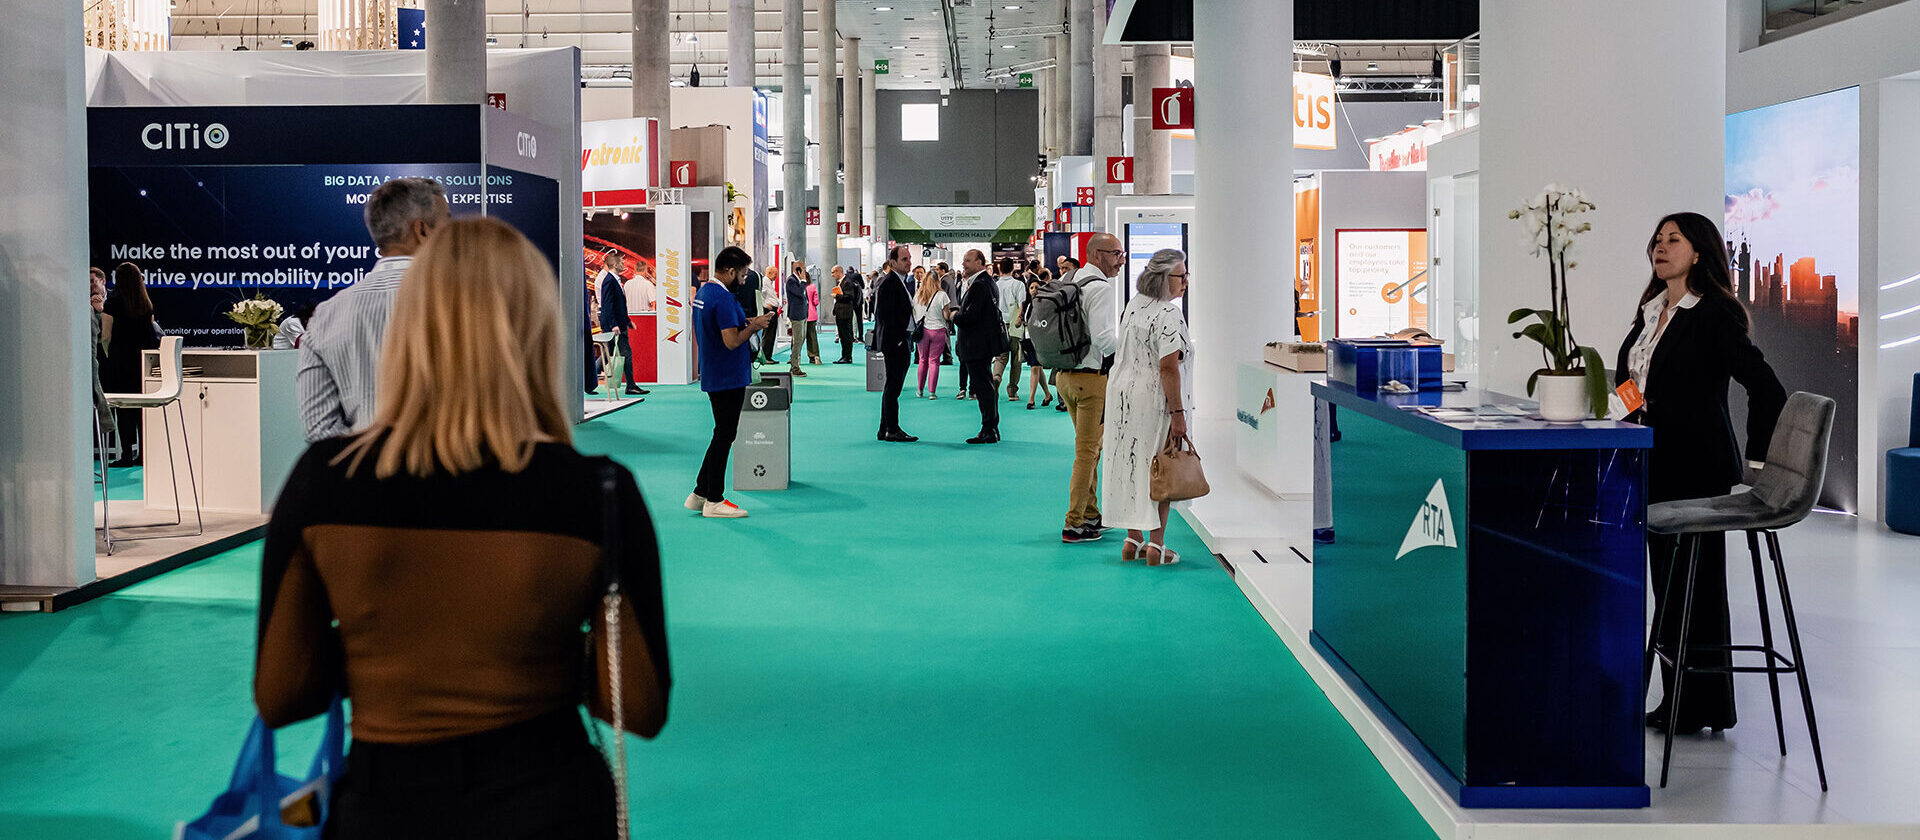 People walking around the exhibition halls, looking at booths at the UITP Summit.